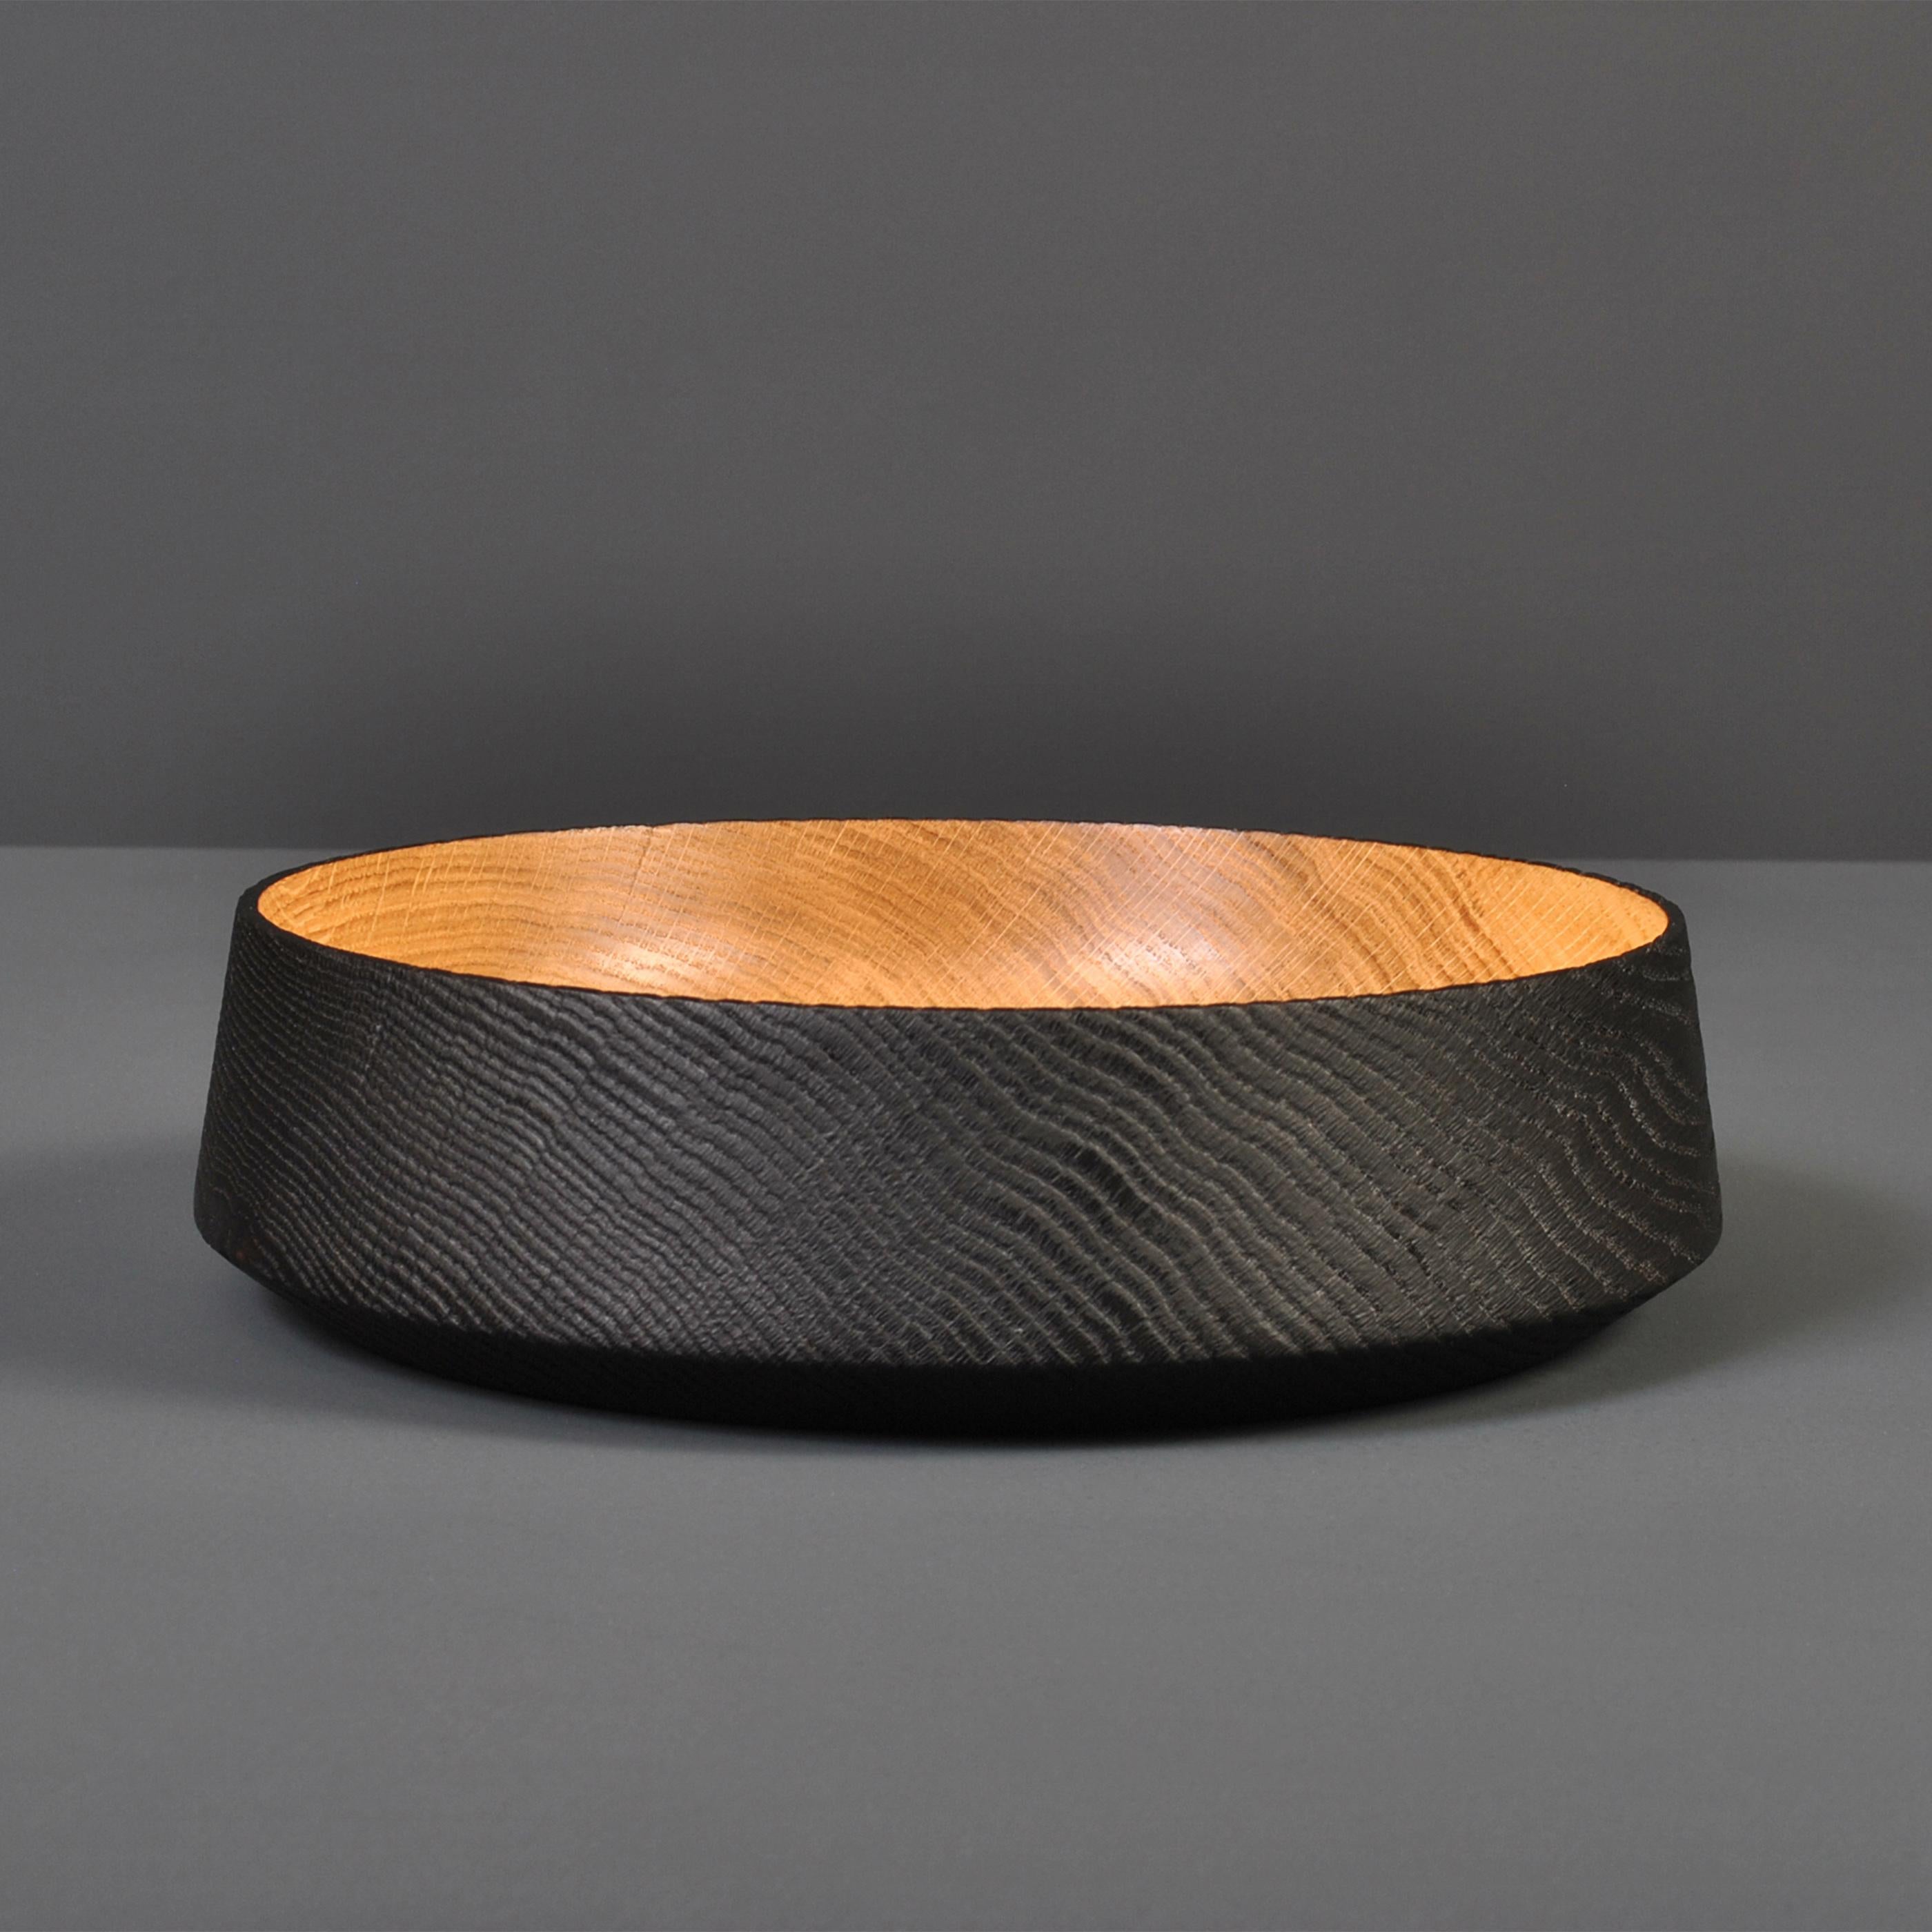 Hand-Crafted Handcrafted Turned Oak Yakisugi Bowl For Sale